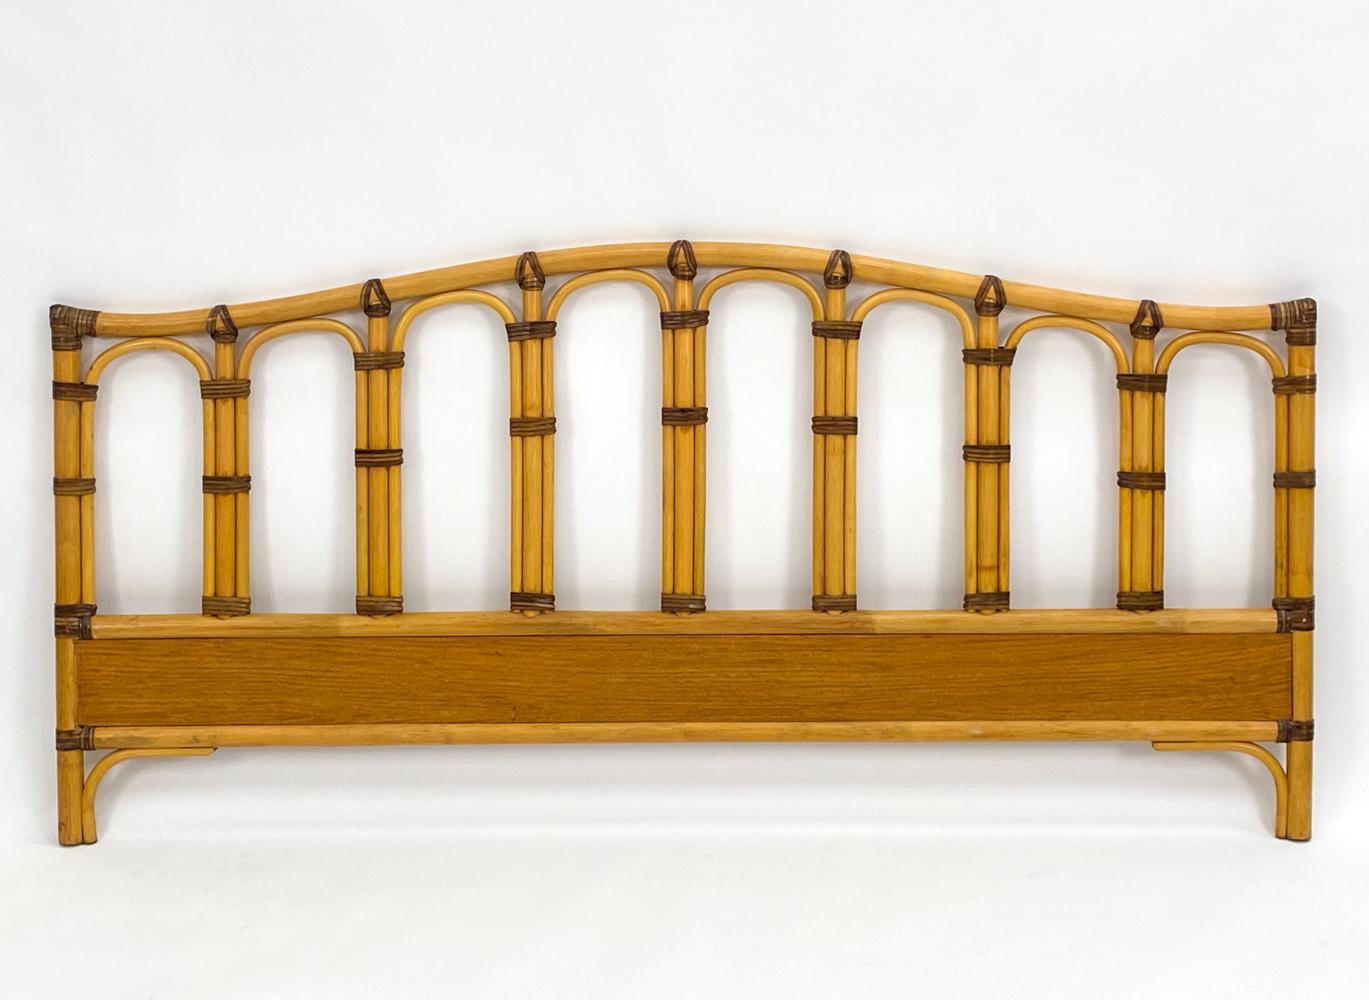 Channel the breezy tropics with this exceptional headboard and footboard set by Dux of Sweden. Constructed from genuine pole rattan, this set features a classic slatted silhouette, softened by arched intervals and a gently curved and flared crown.